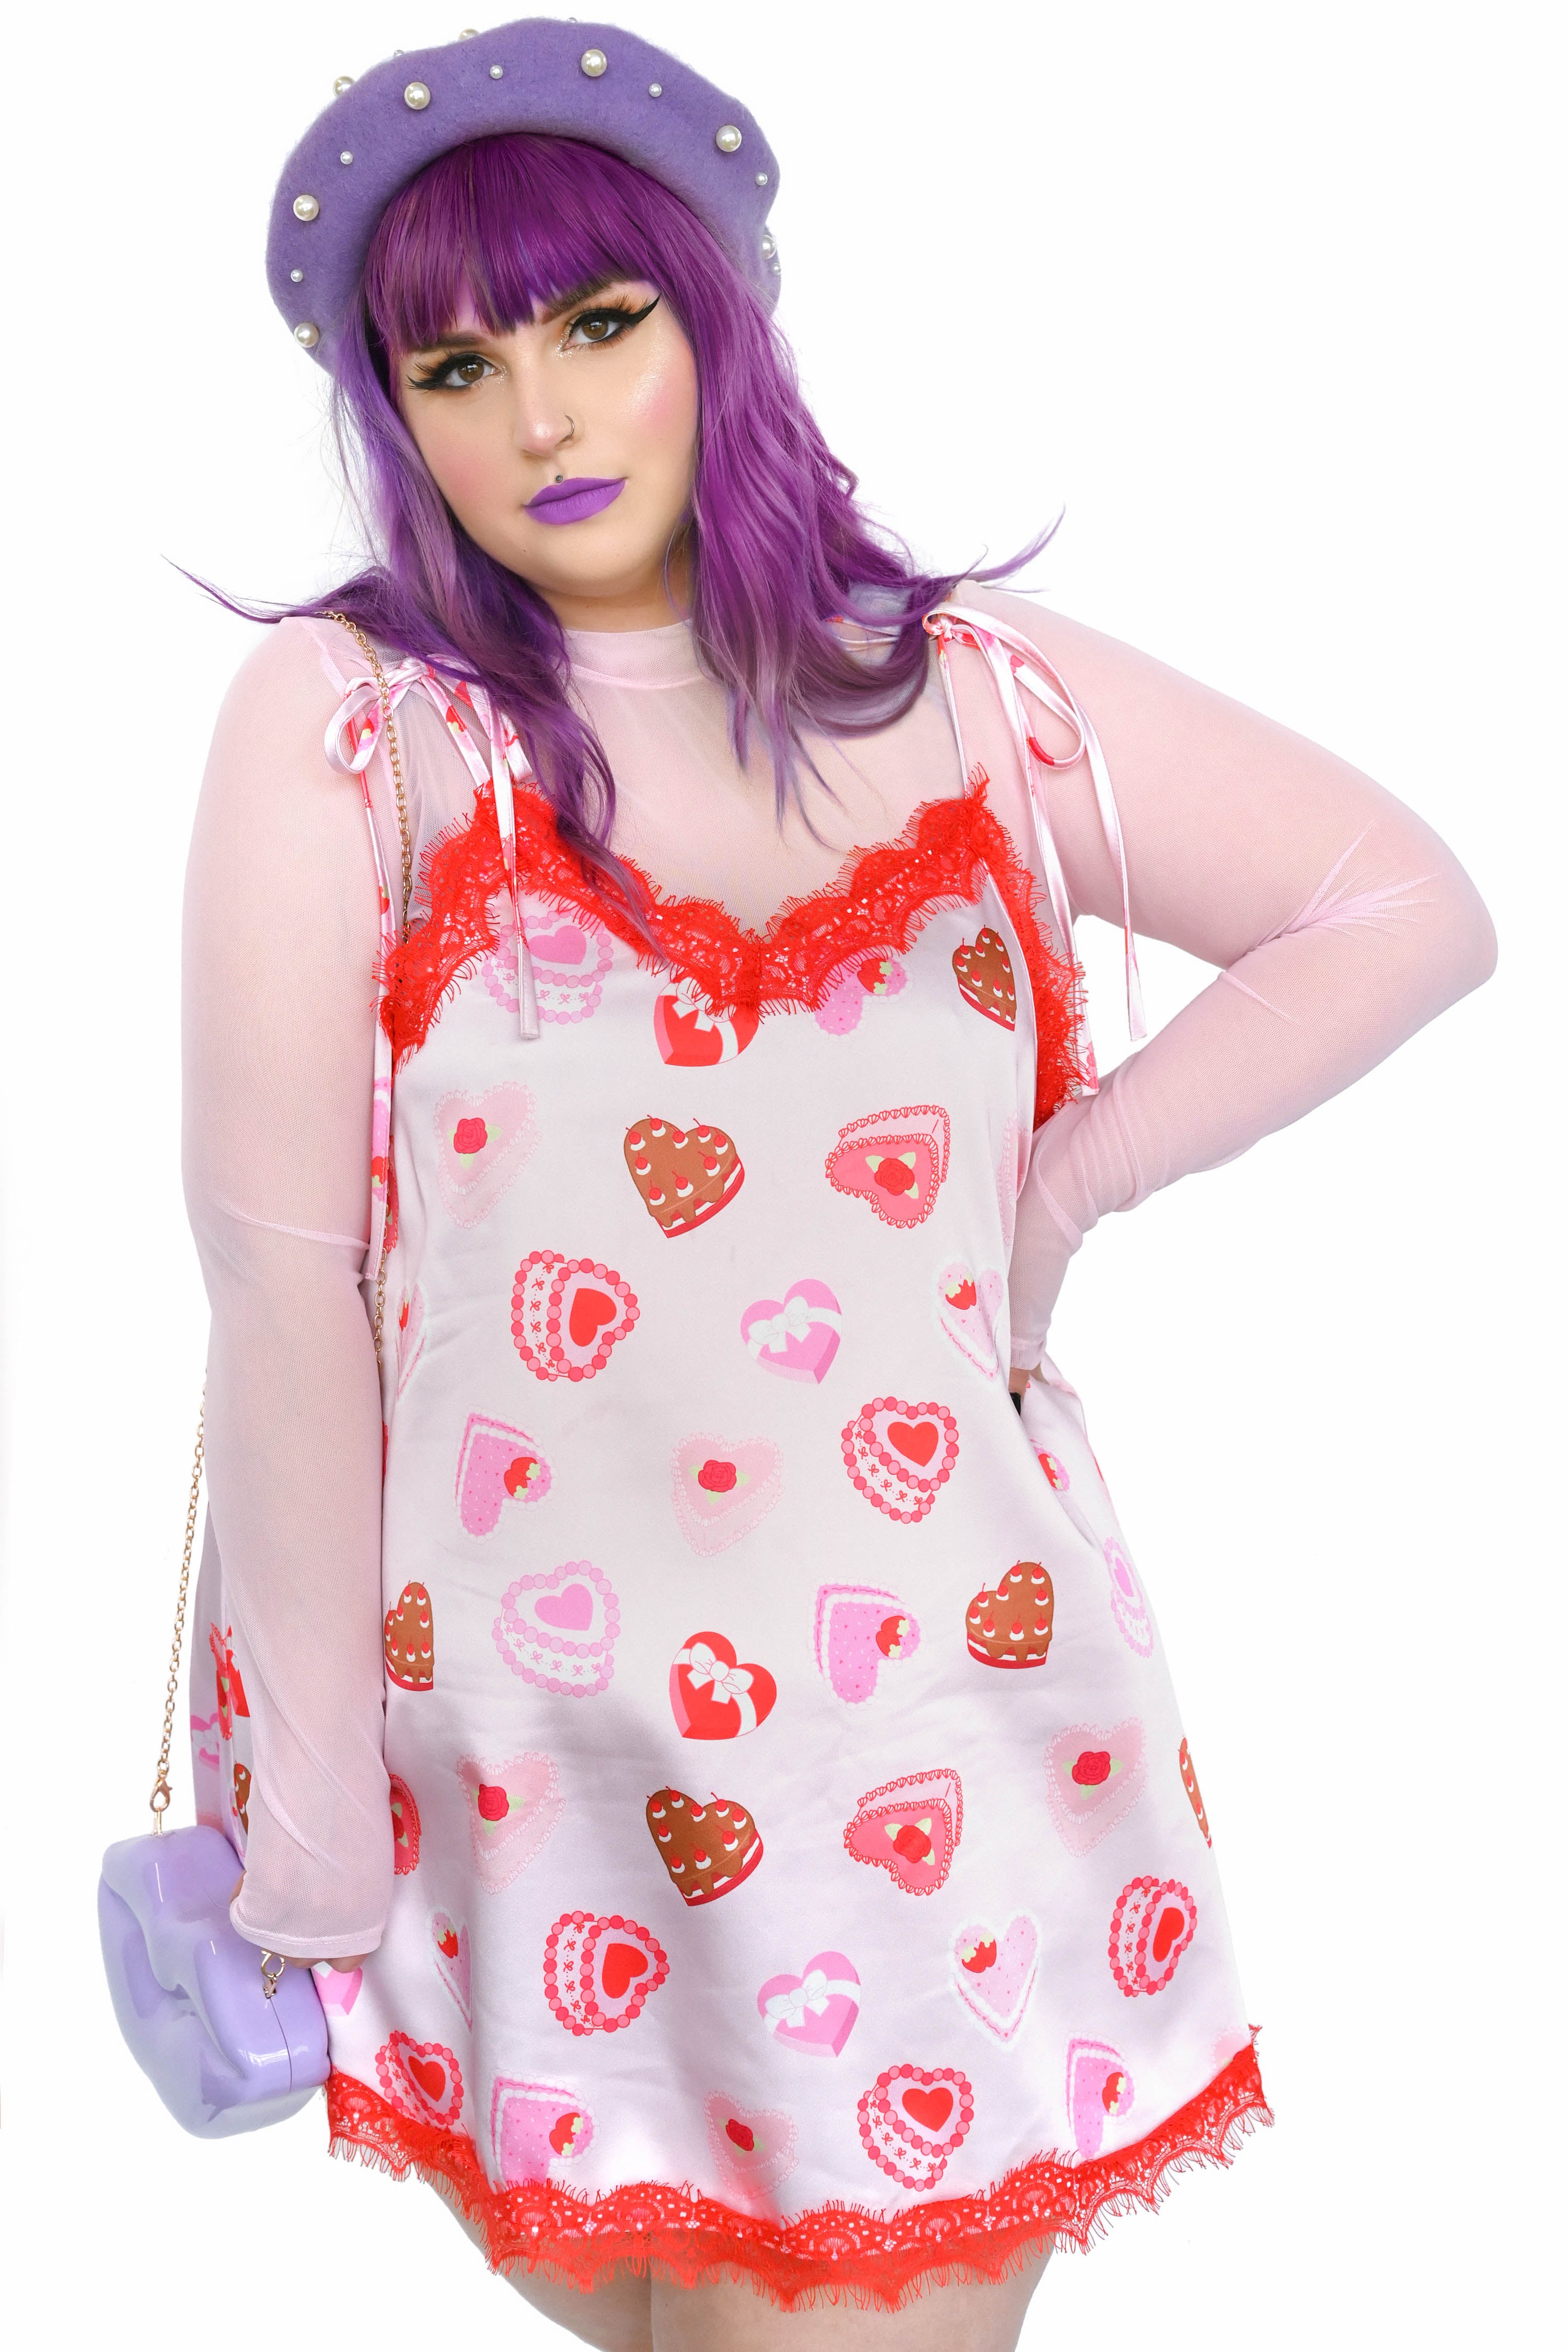 satin slip dress with valentines heart cakes all over print. Red eyelash lace trim. Satin ribbon tie shoulders